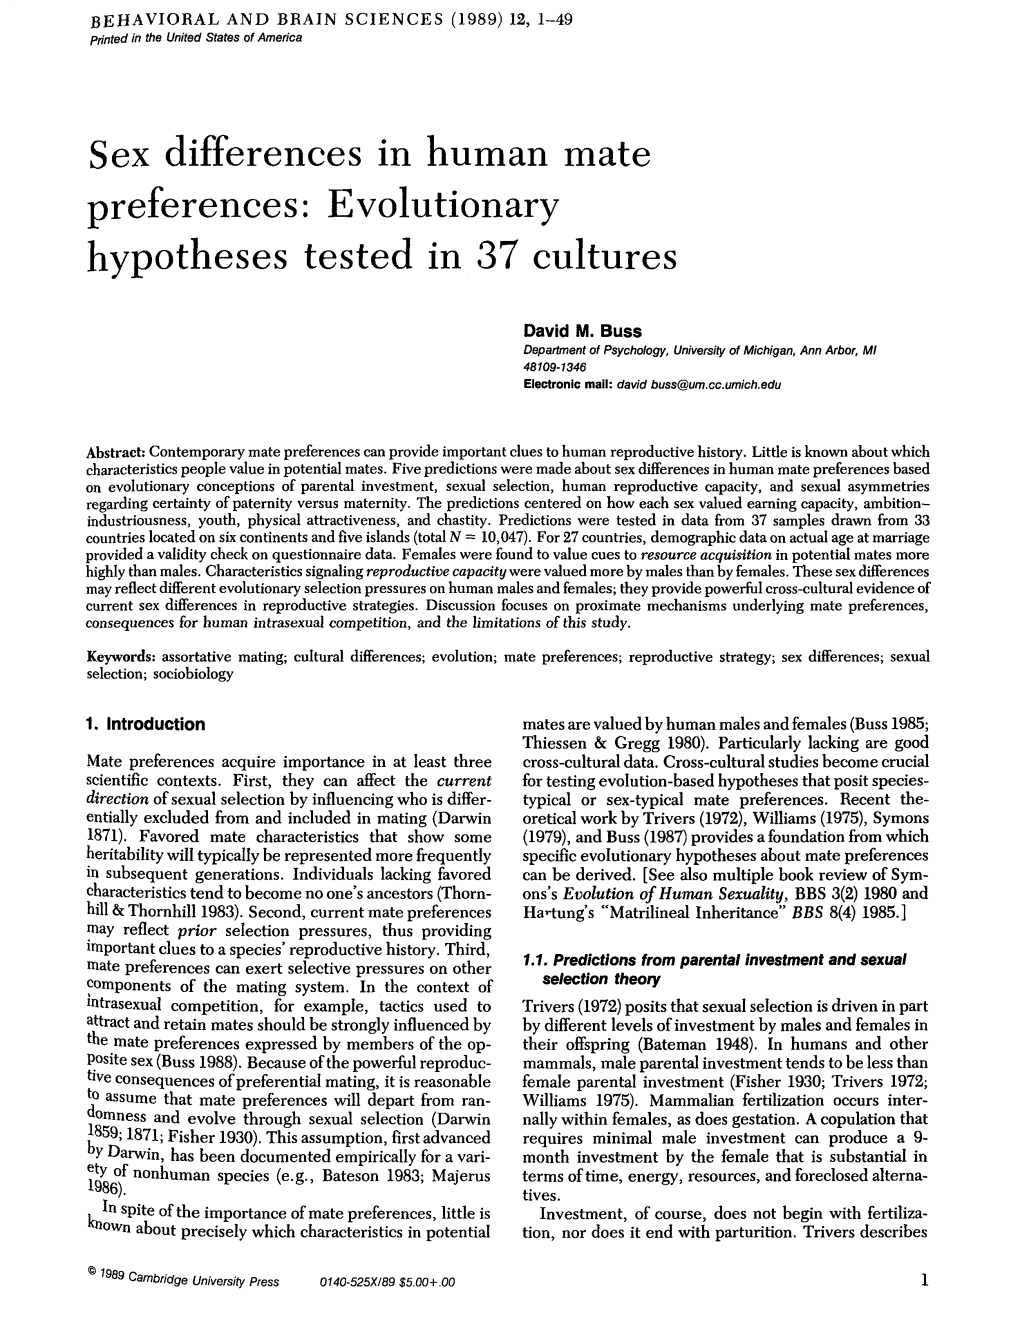 Sex Differences in Human Mate Preferences: Evolutionary Hypotheses Tested in 37 Cultures